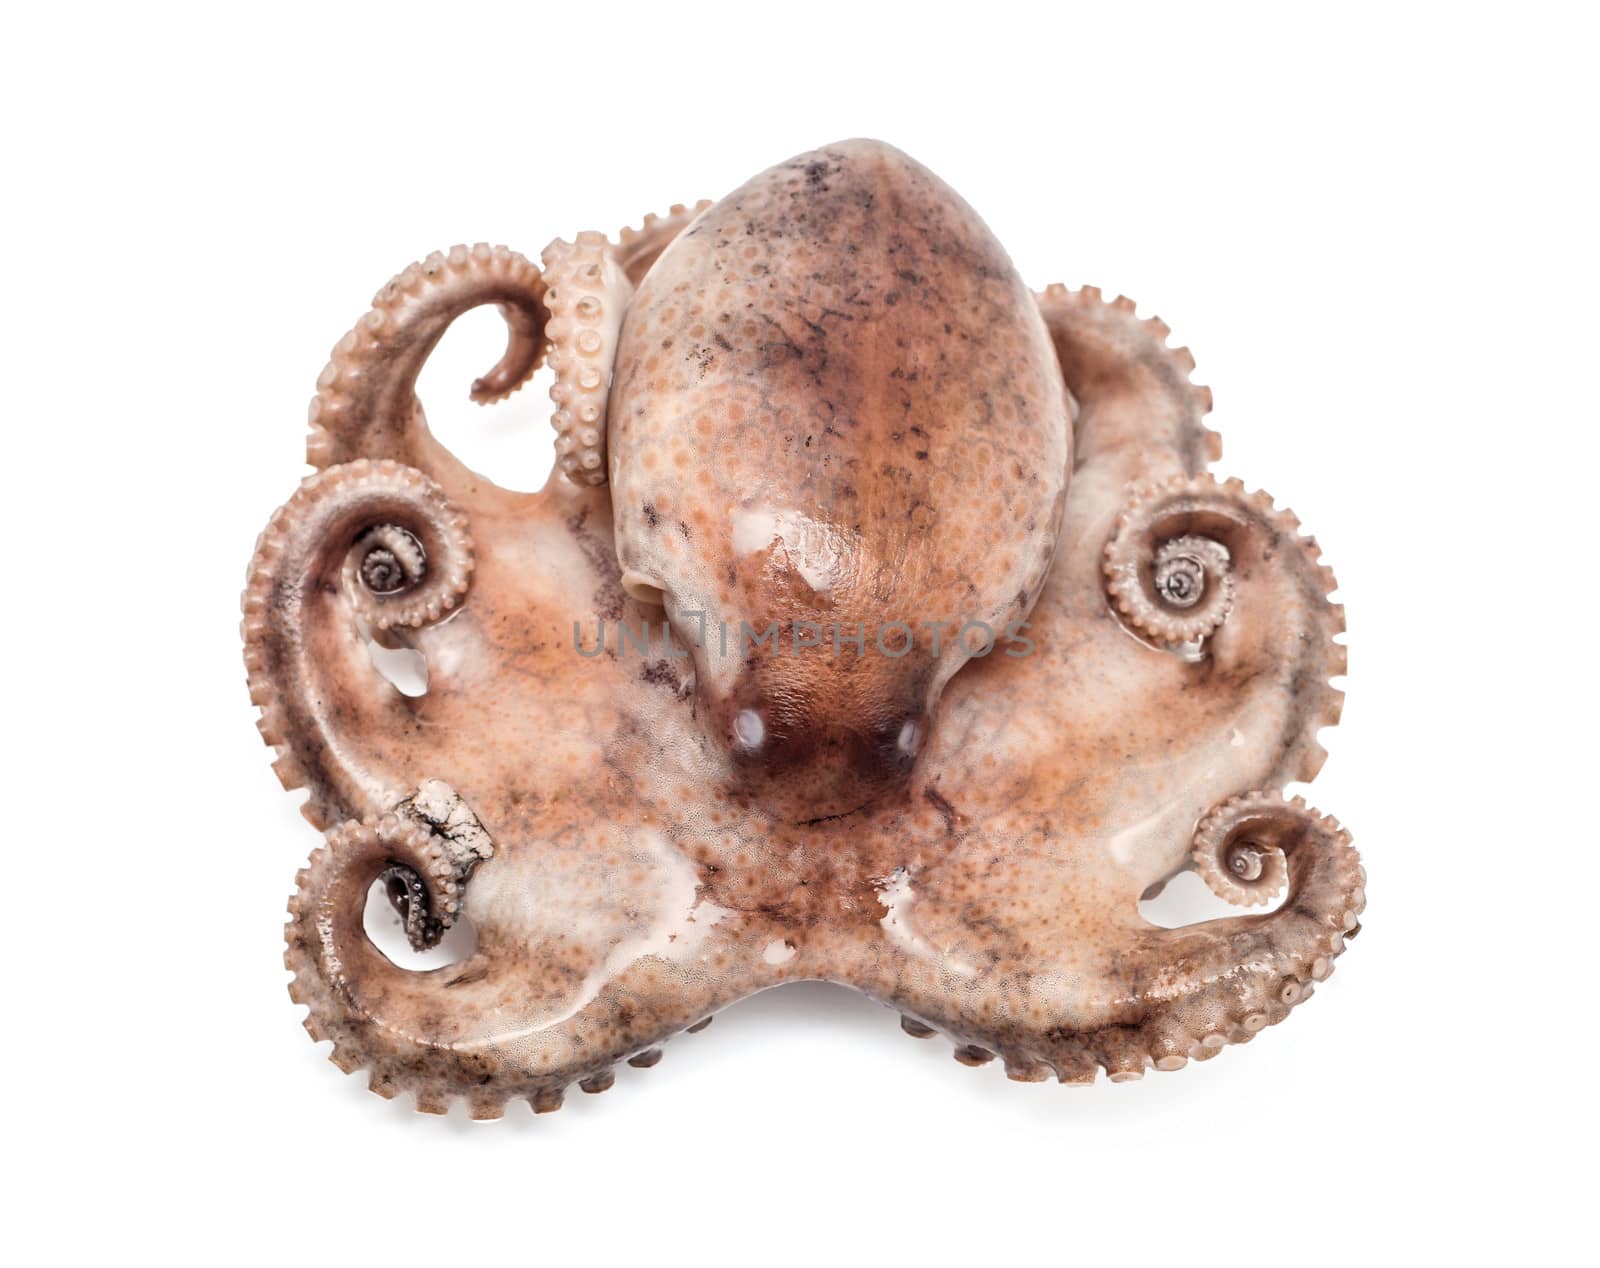 Small octopus isolated on white background